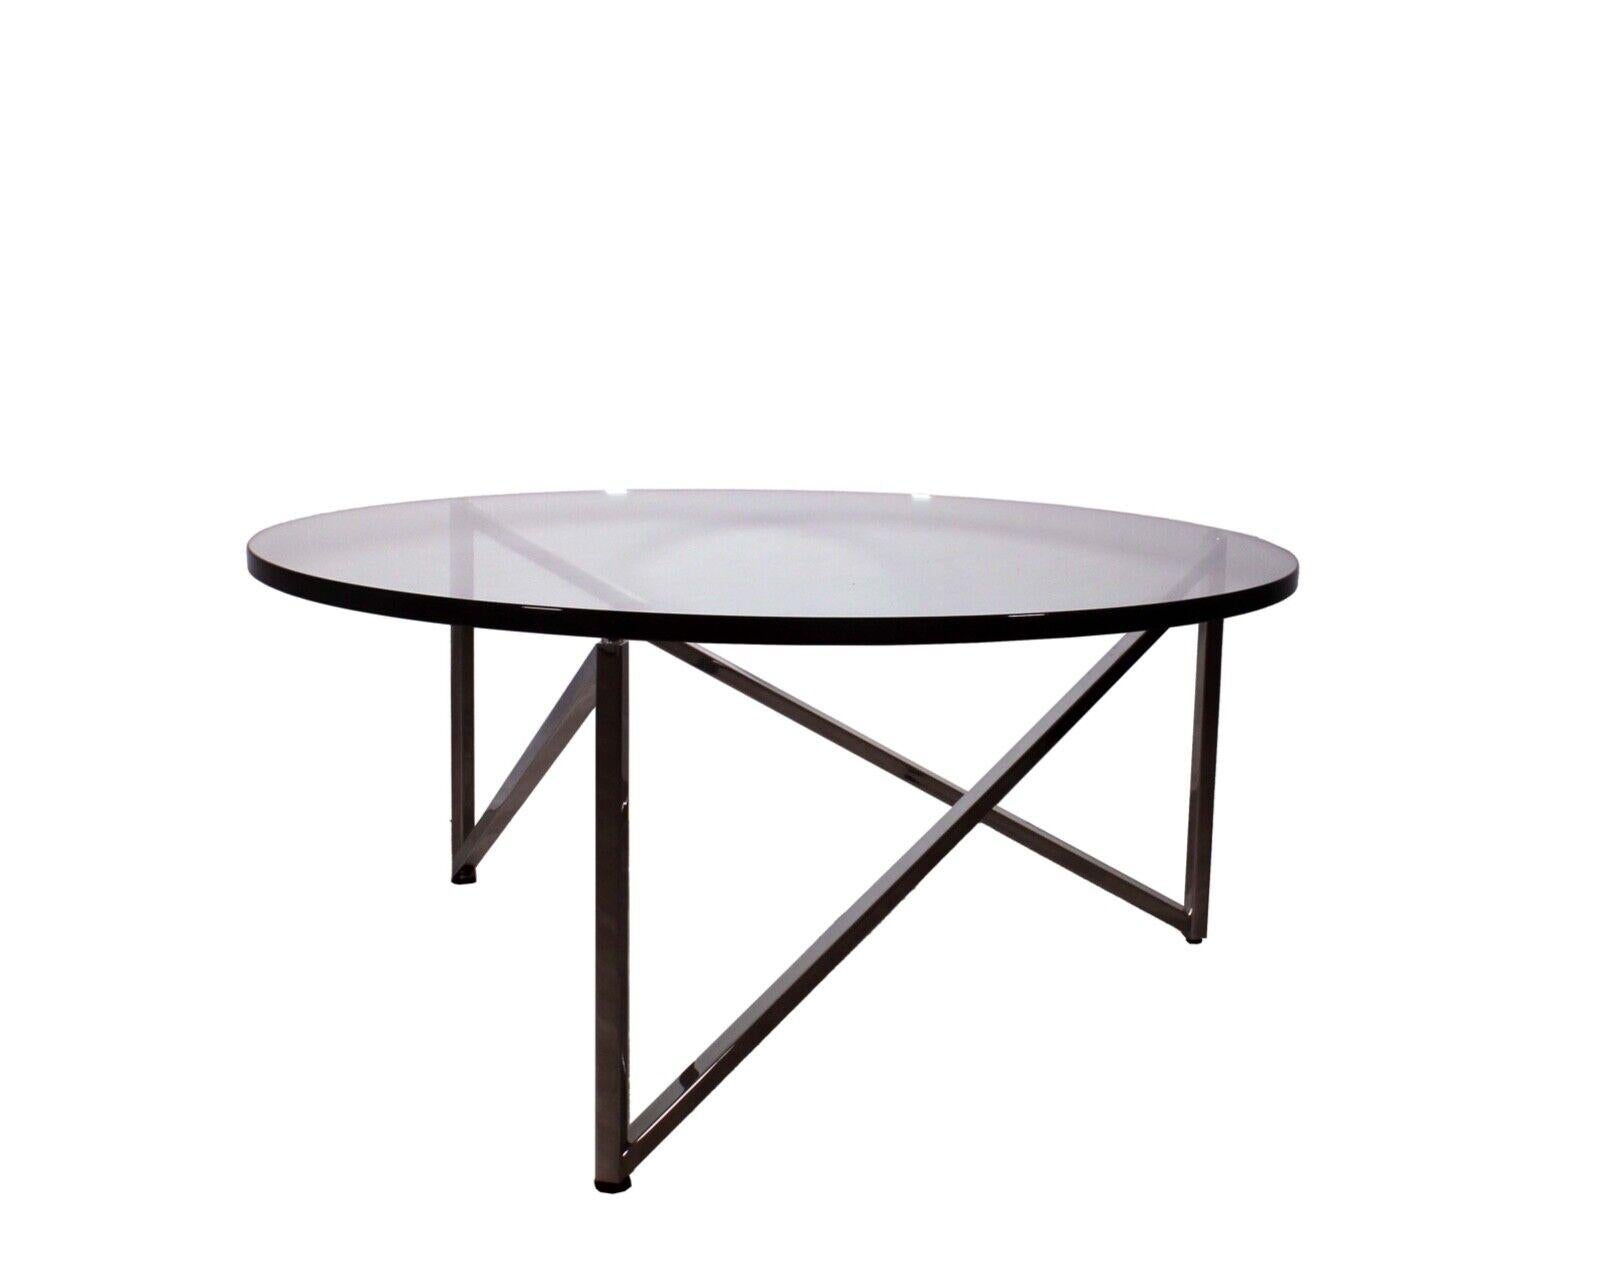 Contemporary Modern Round Glass Coffee Table Polished Stainless Steel Brueton In Good Condition For Sale In Keego Harbor, MI